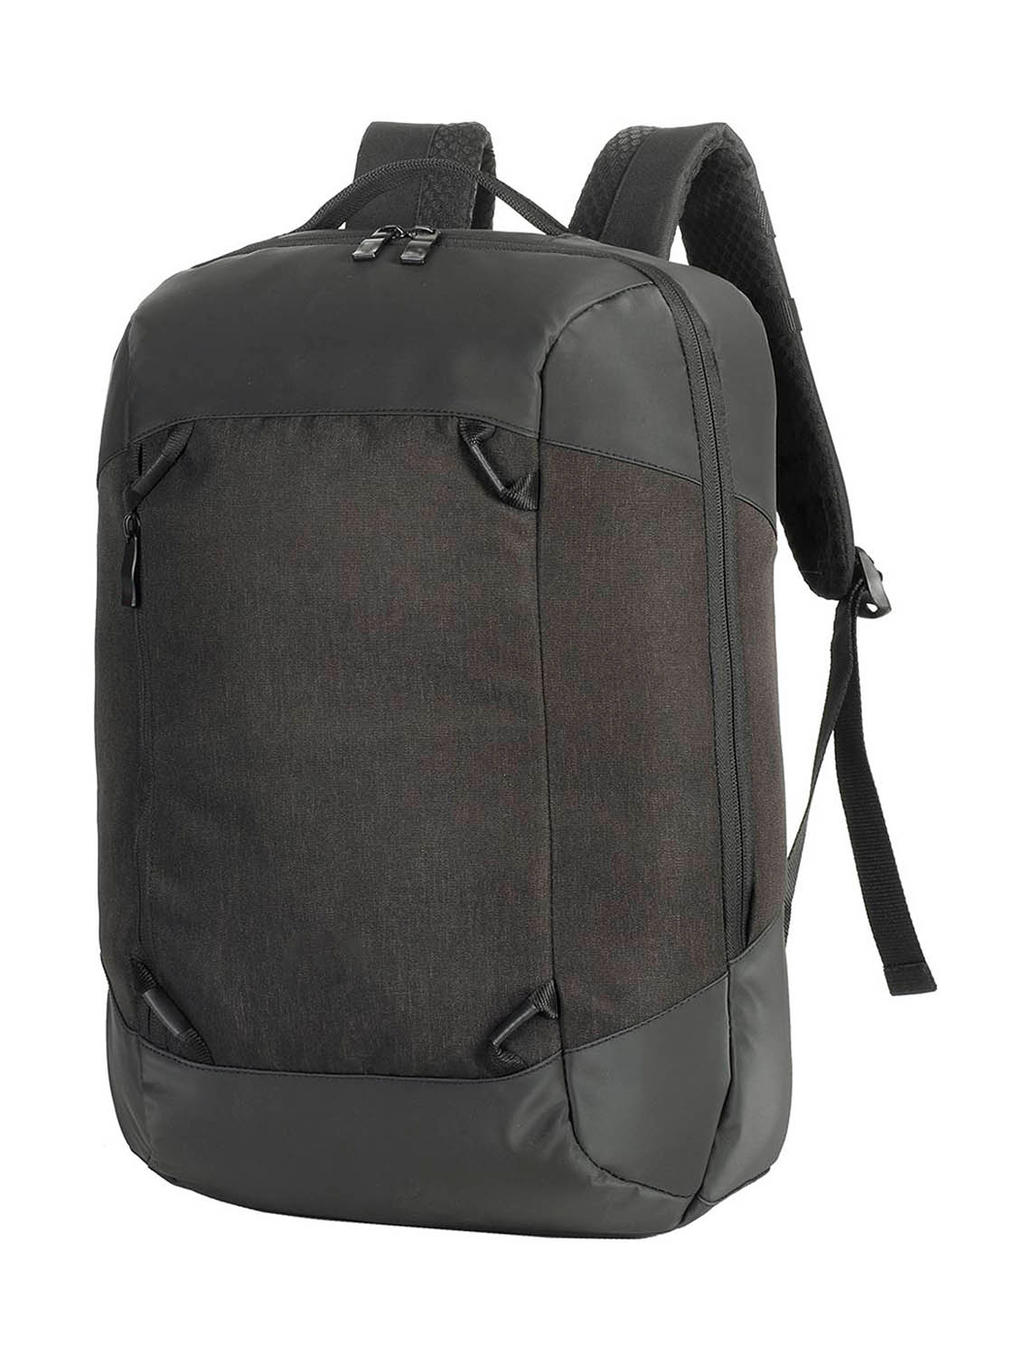 Luxembourg Vital Laptop Backpack